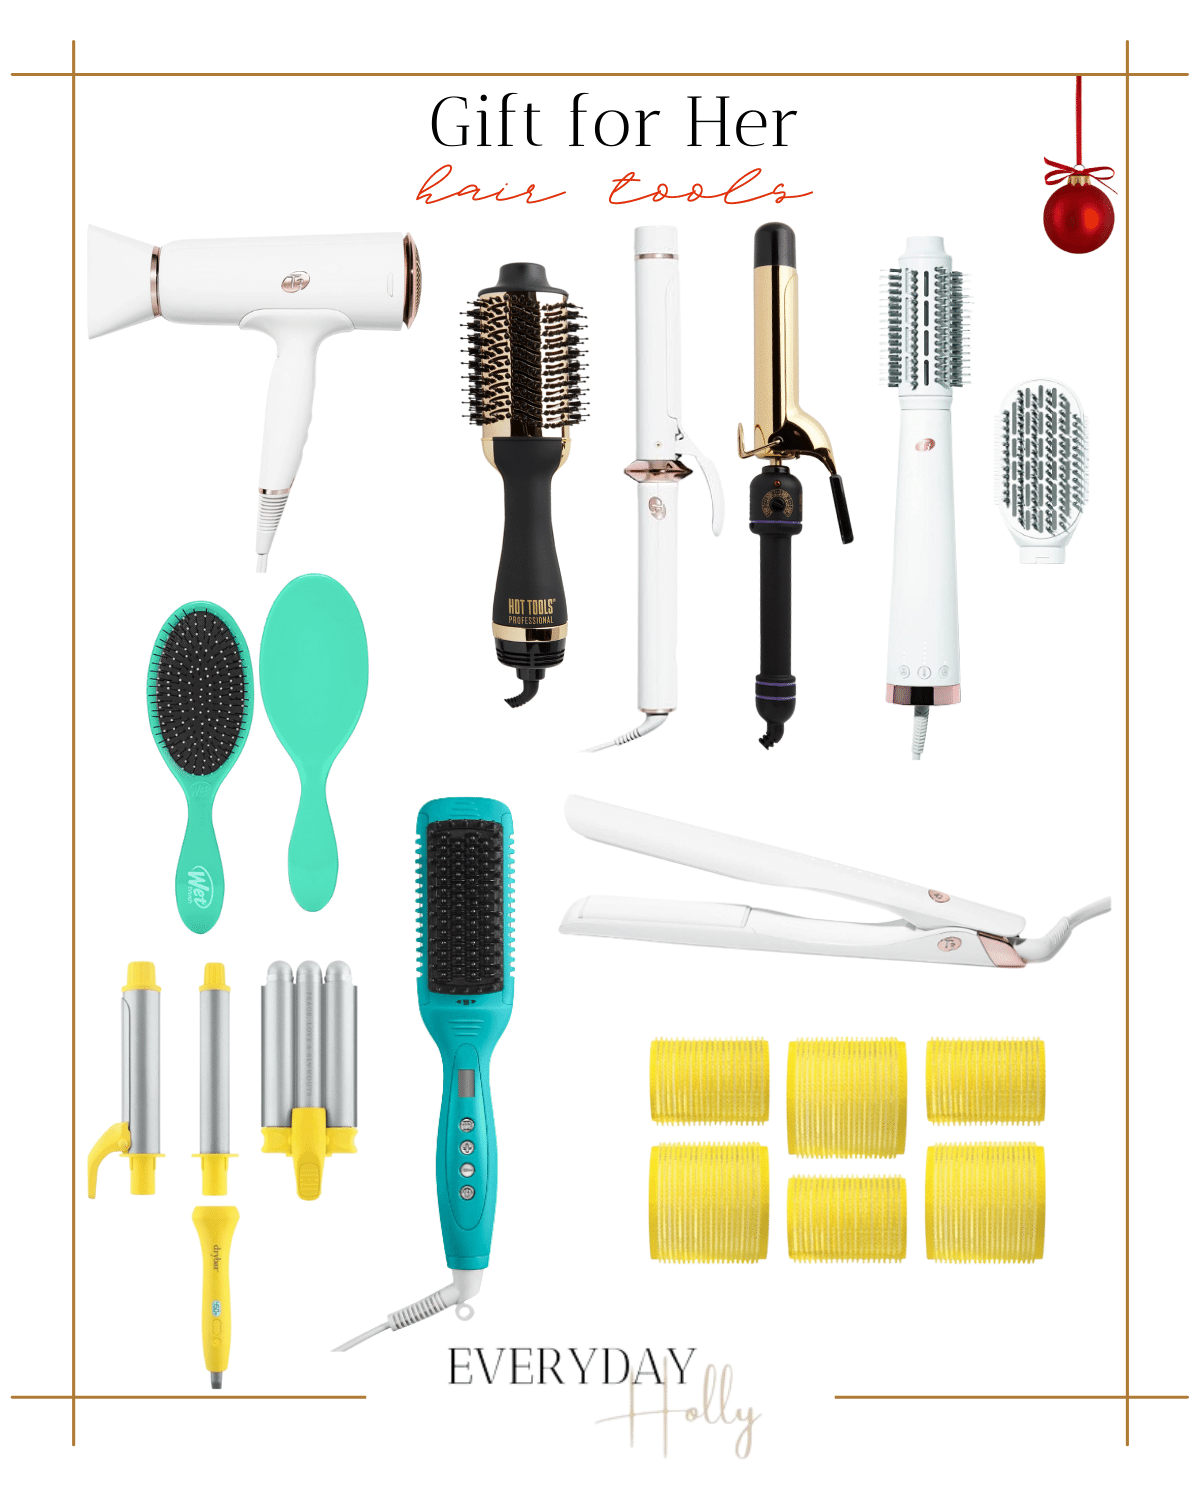 gift ideas for her, hair tools, blow dryer, hot round brush, curling irons, hot brush, wet brush, 3 in 1 hair tool kit, rollers